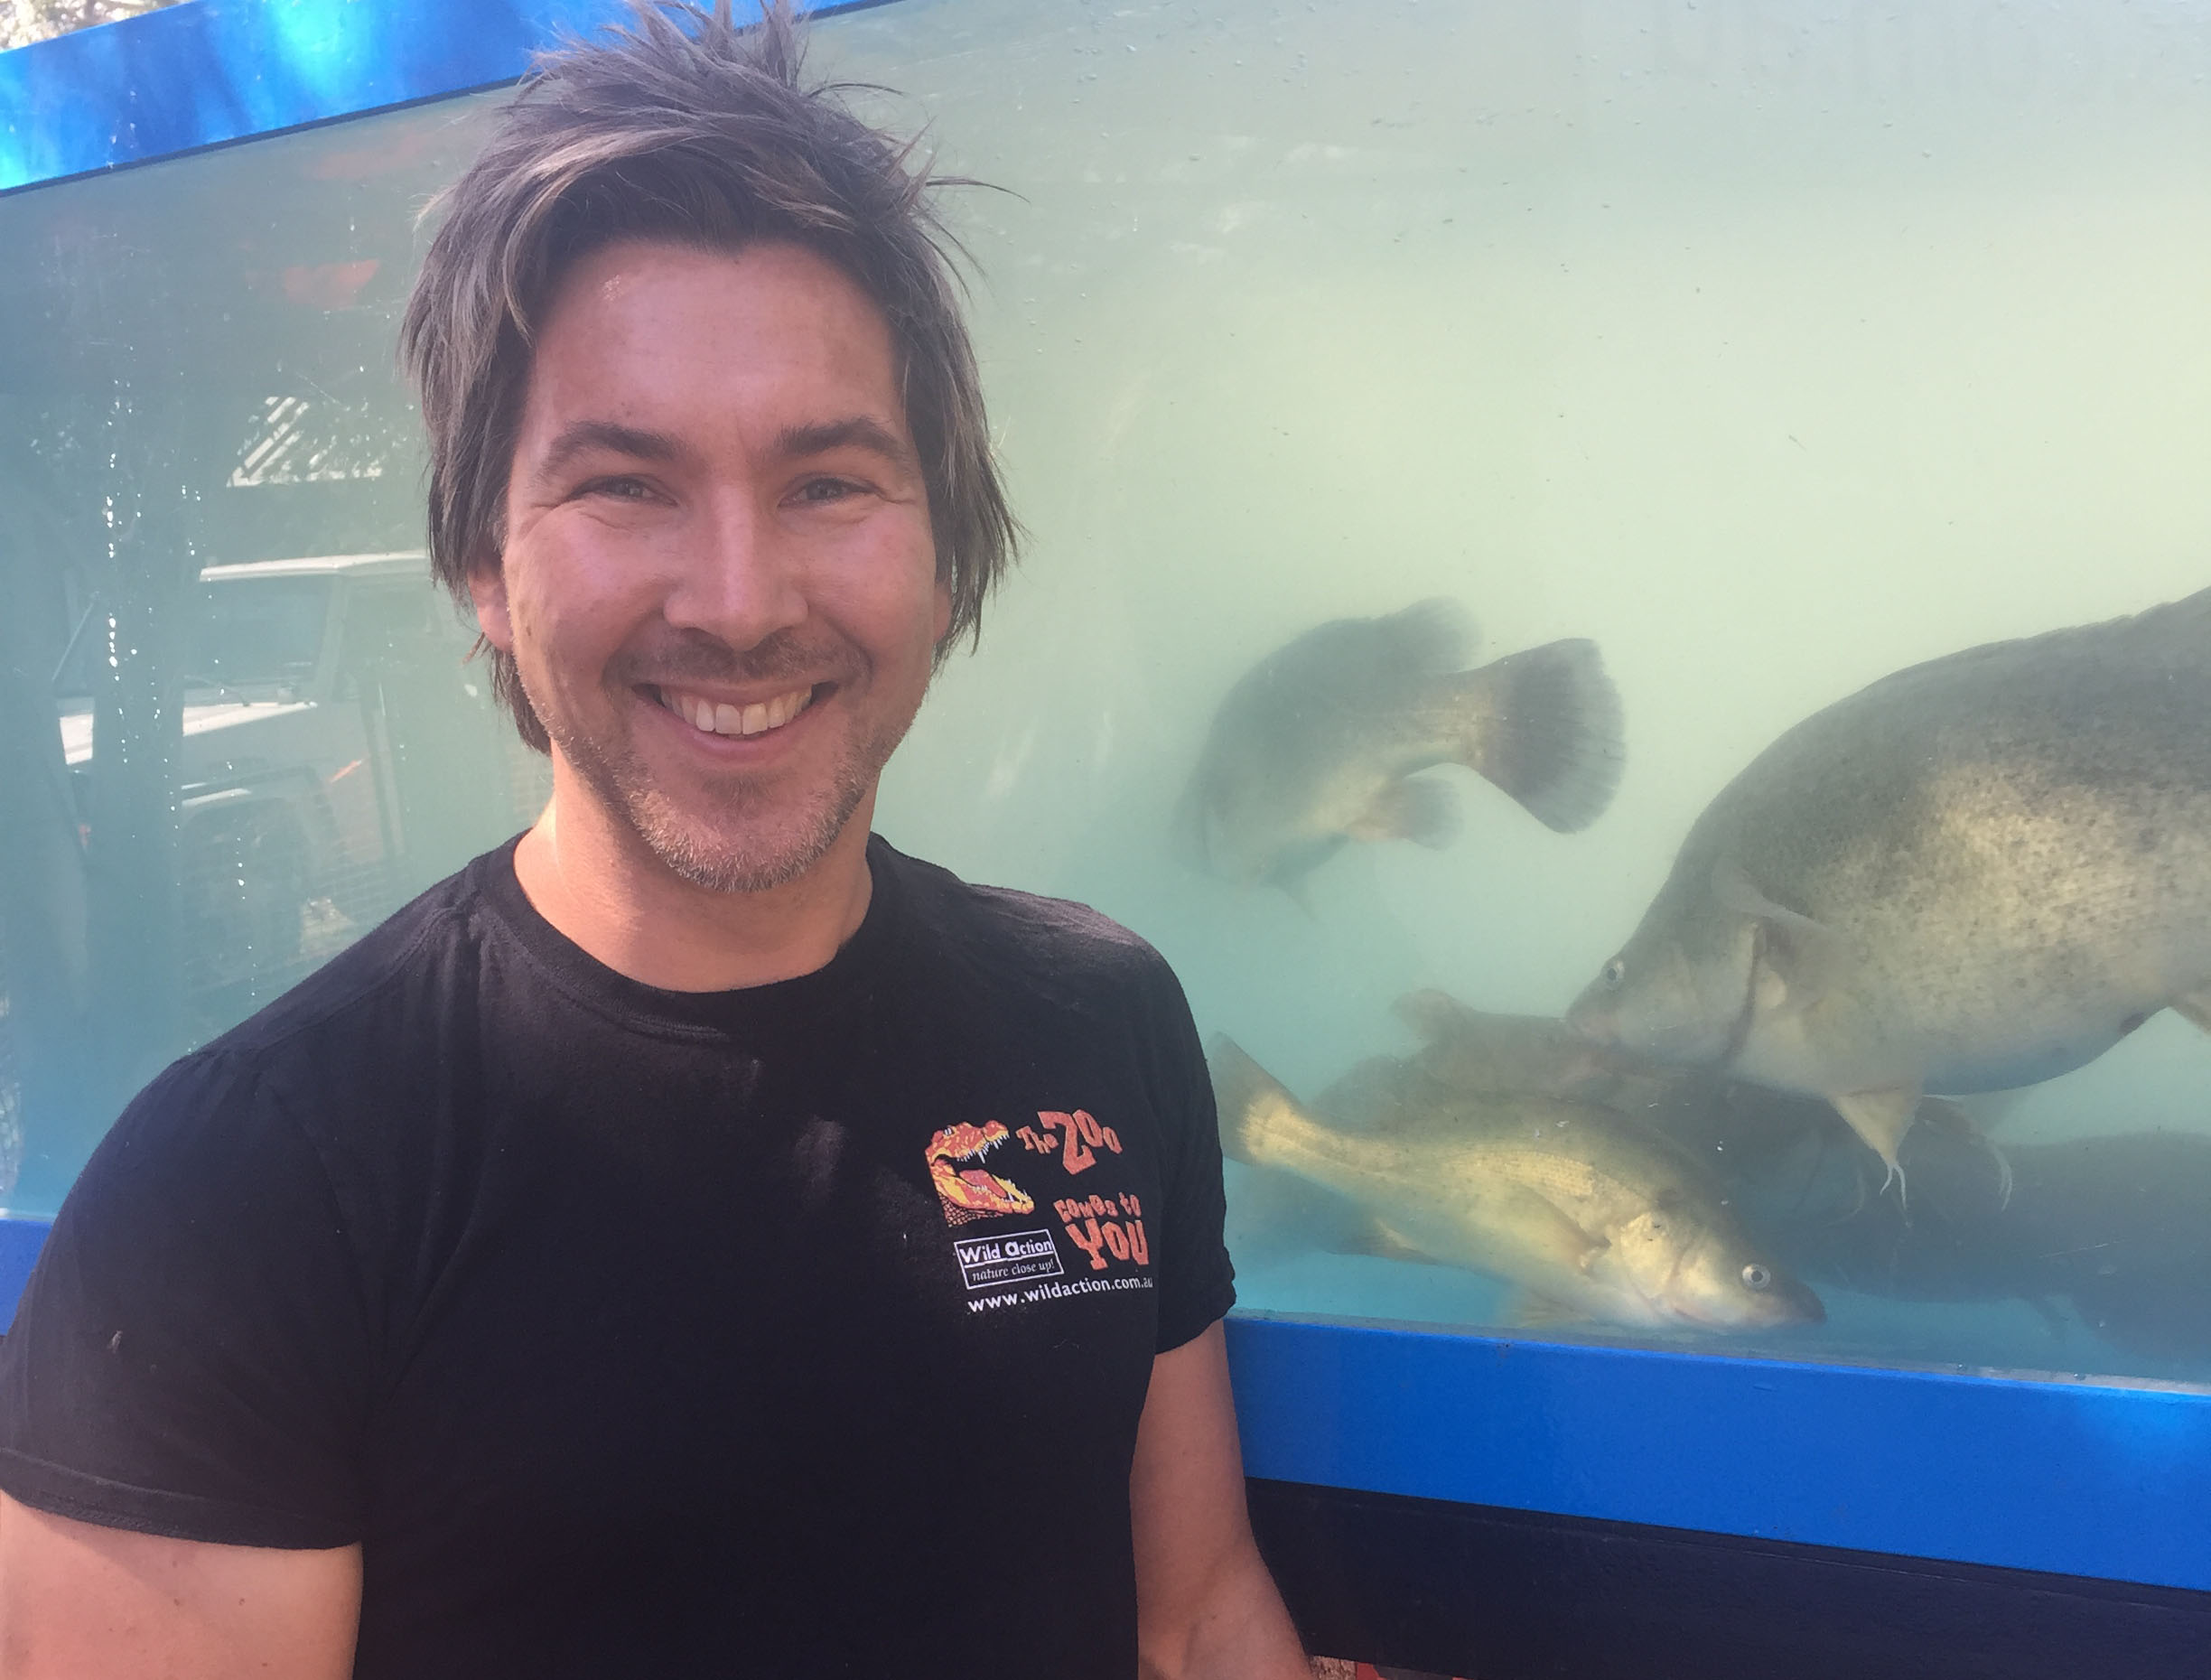 Zoologist and TV presenter Chris Humfrey, who ran river wildlife education sessions at the competition, next to a tank holding Spotted Bess, photo by Adele Rohde